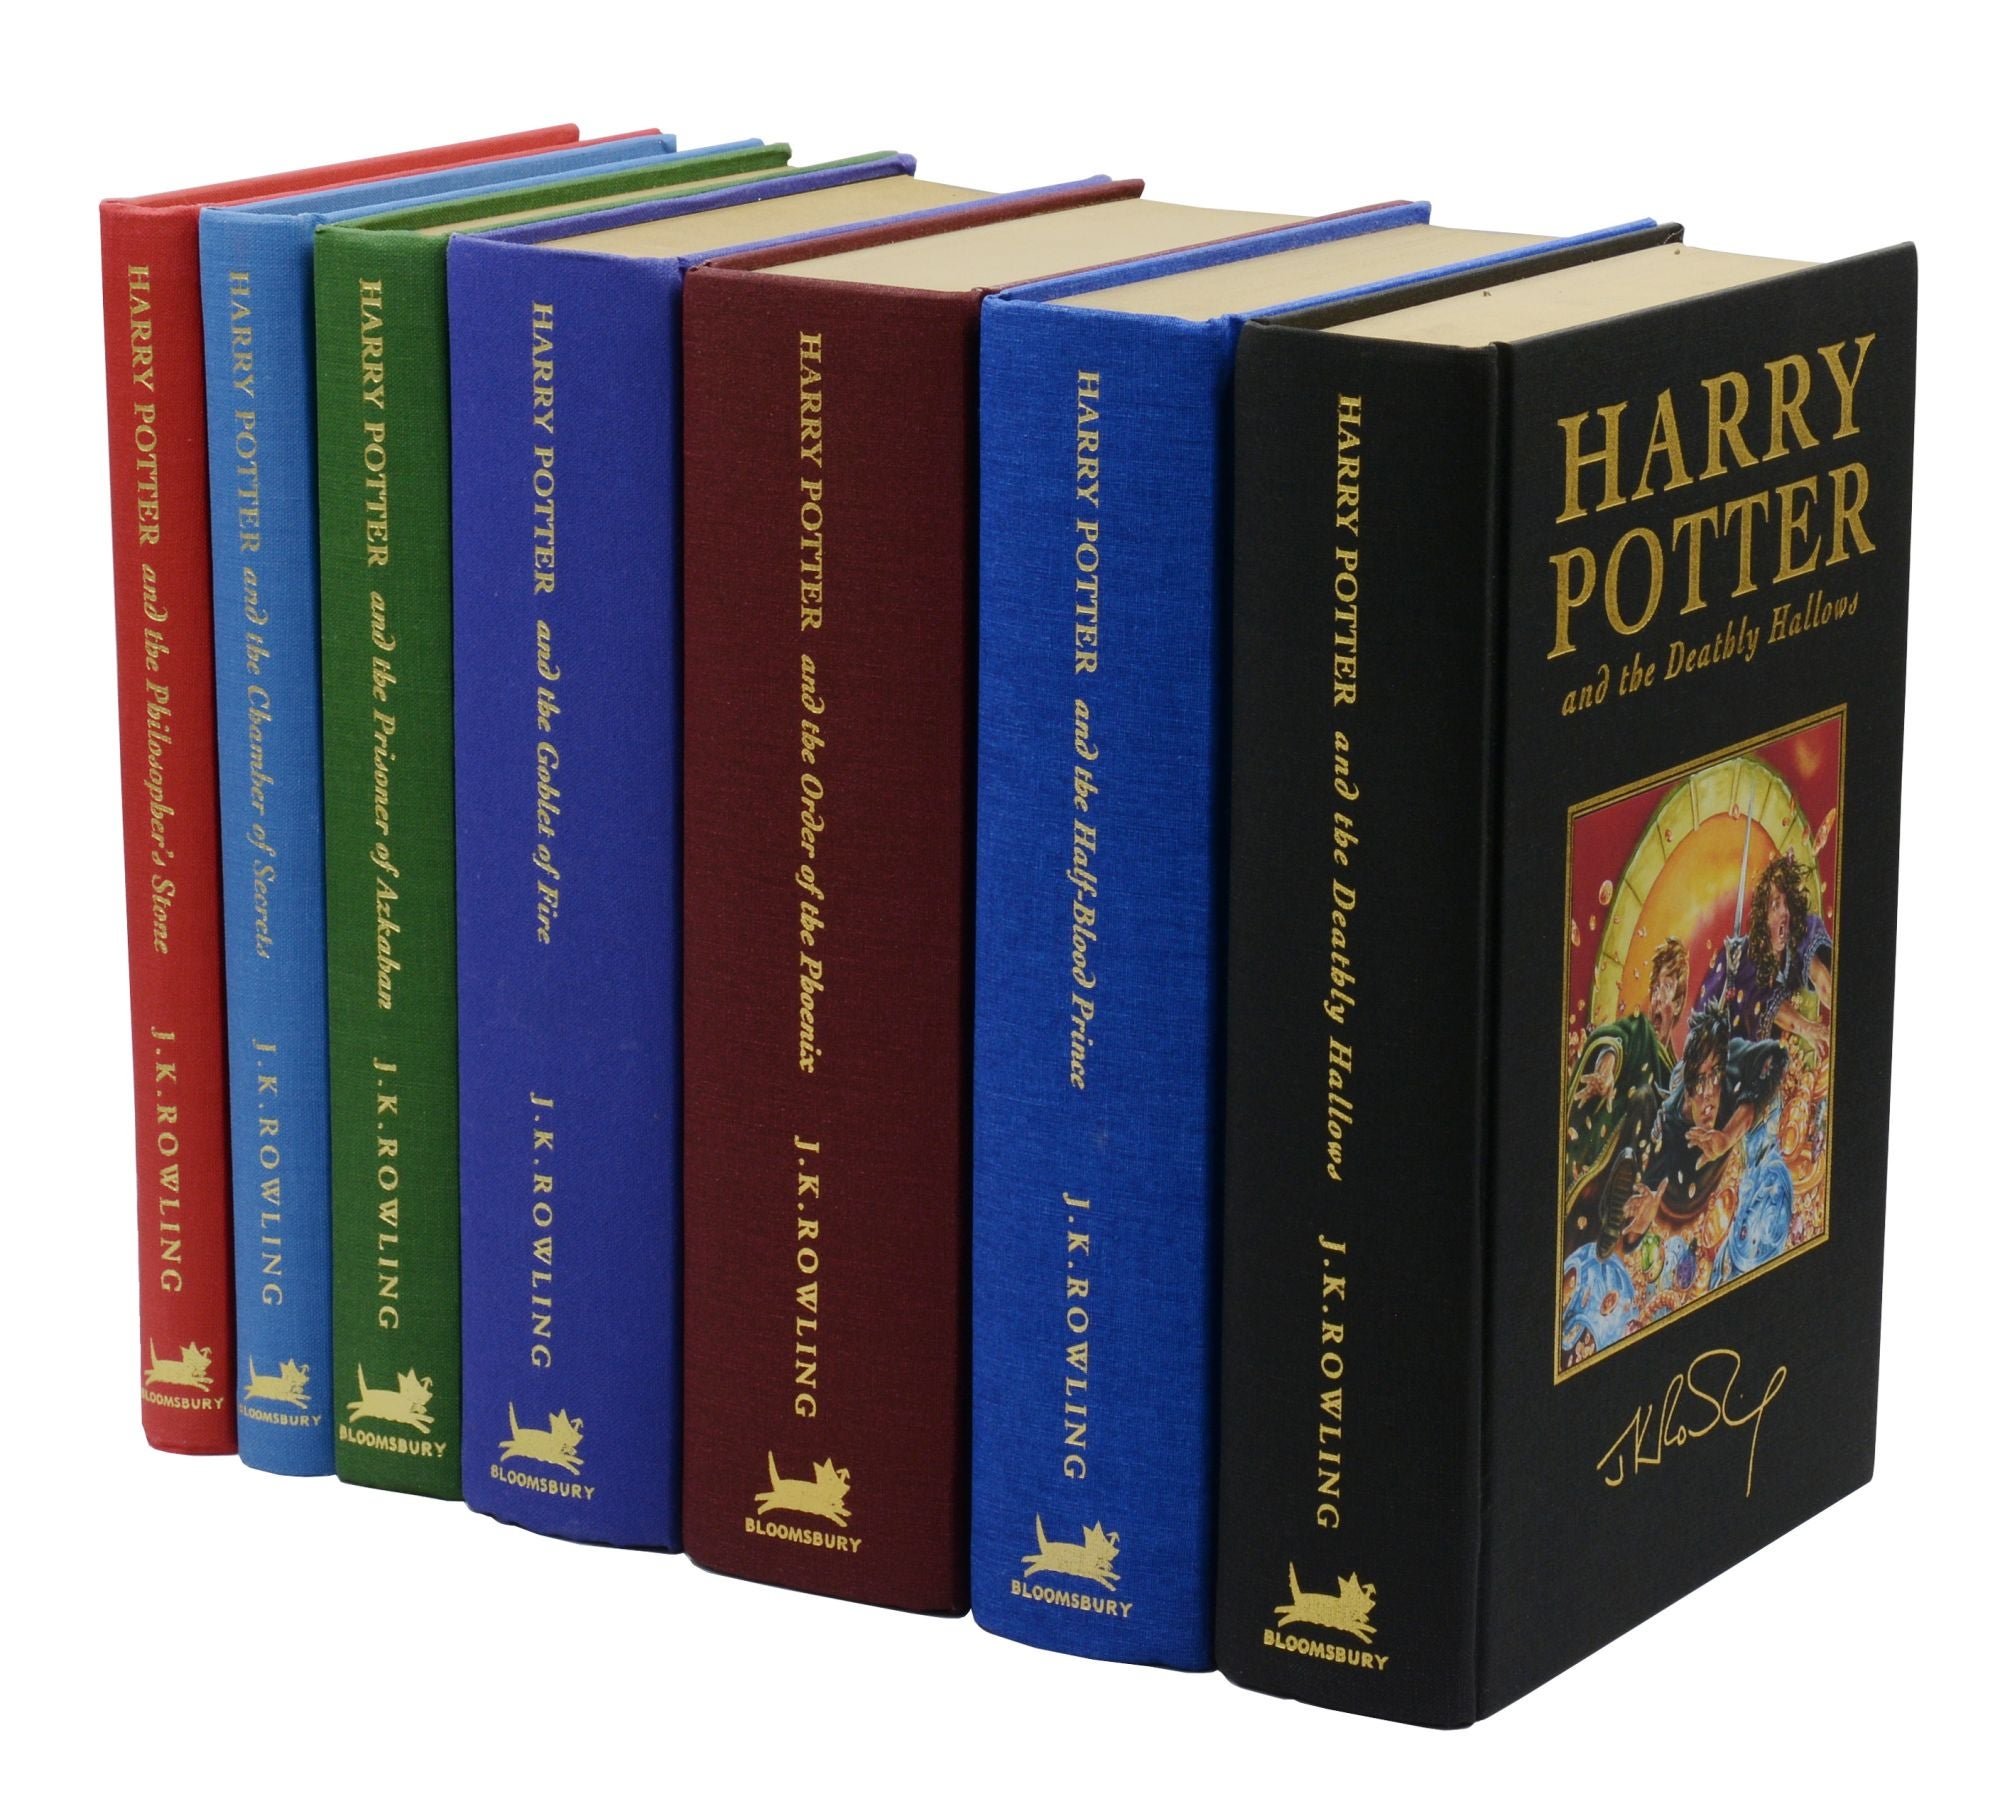 Harry Potter, complete set of the collector's deluxe editions:  Philosopher's Stone, Chamber of Secrets, Prisoner of Azkaban, Goblet of  Fire, Order of